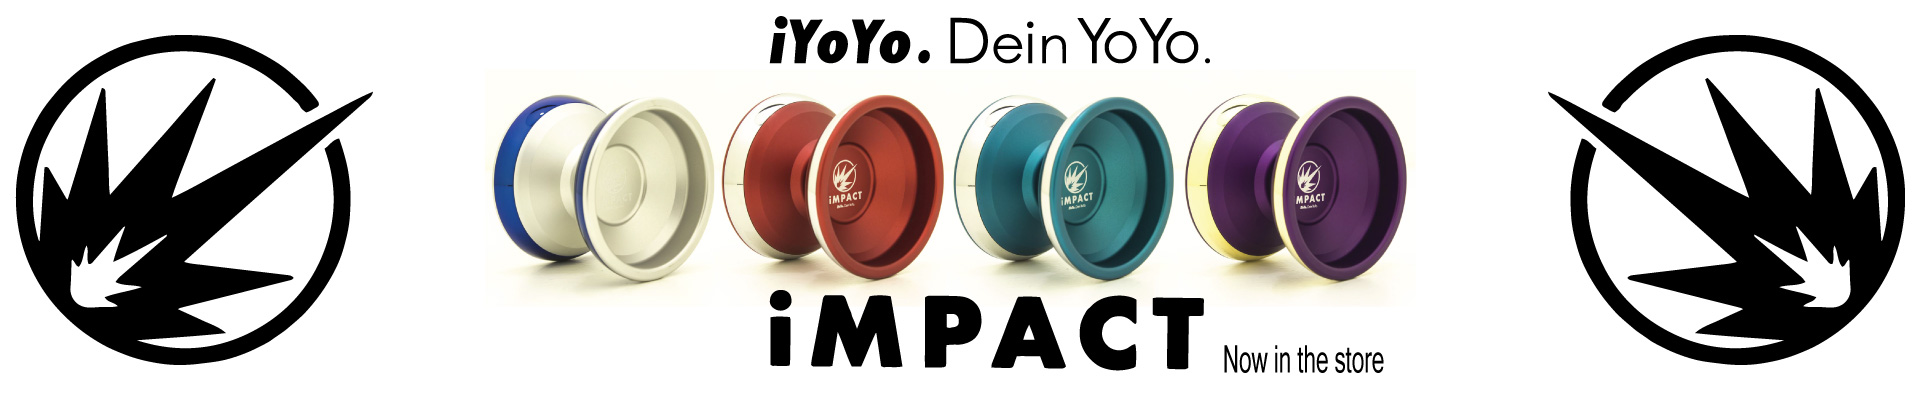 The iYoYo iMPACT is now in the store